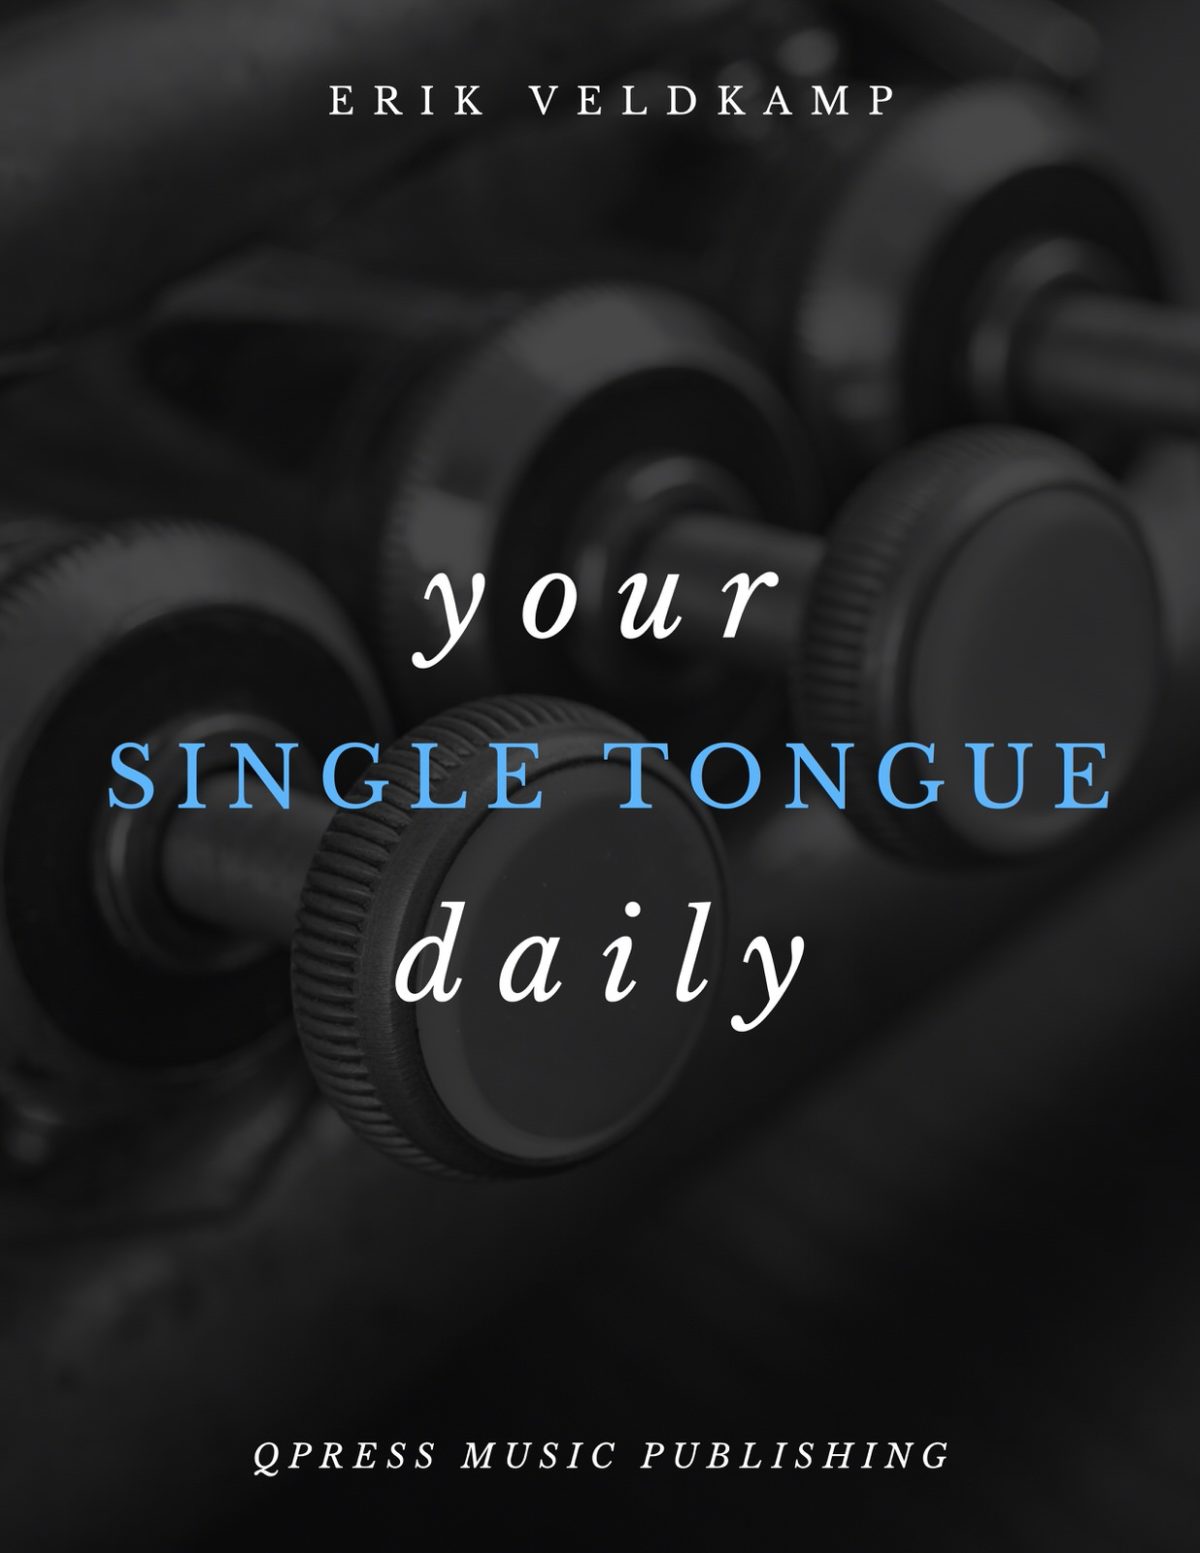 Your Daily Single Tongue